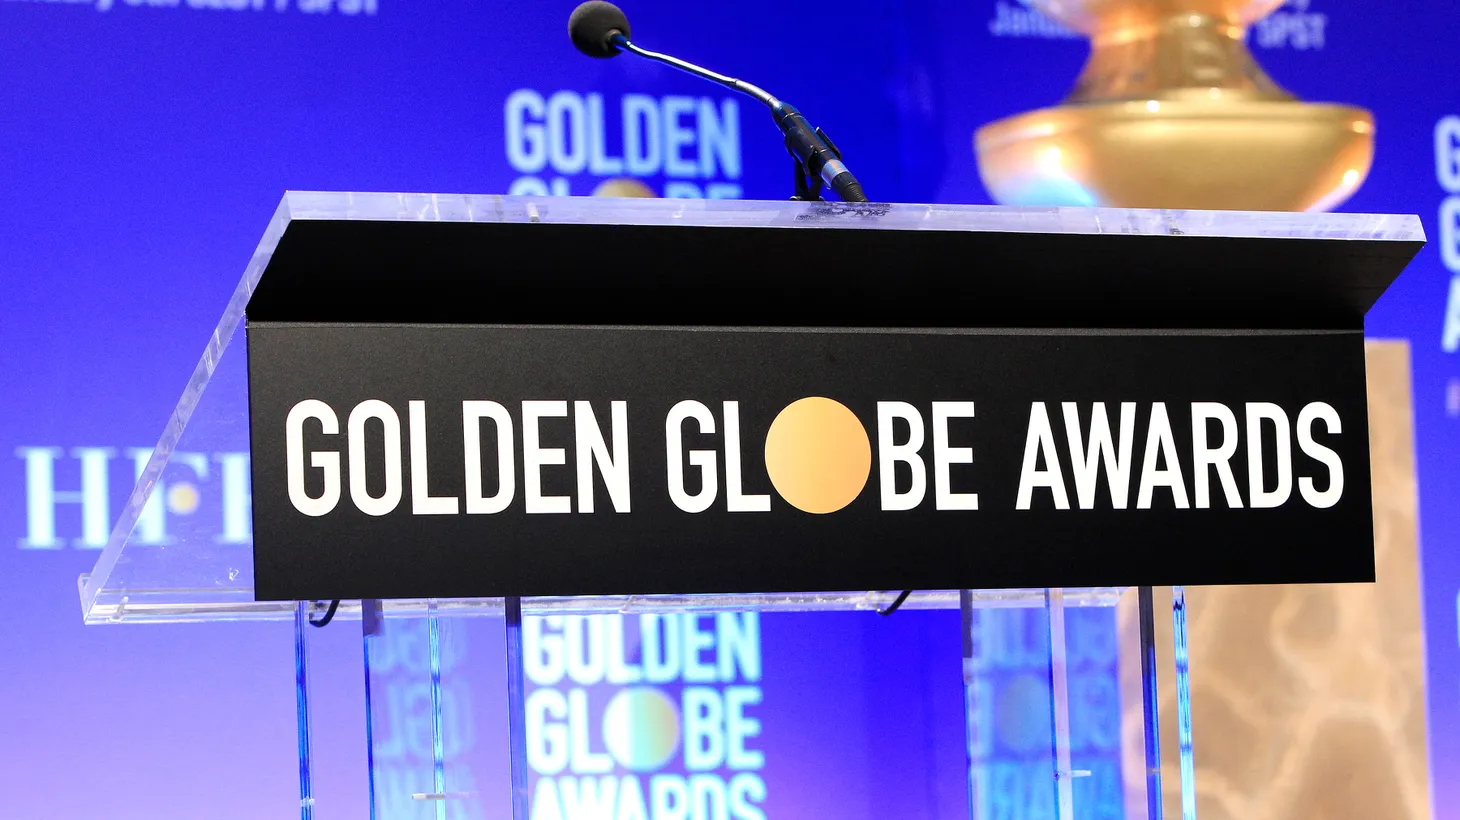 The 79th Annual Golden Globe Awards nominations were announced in December in Beverly Hills. A pared-down ceremony will be held January 9, but there will be no red carpet or press attending.